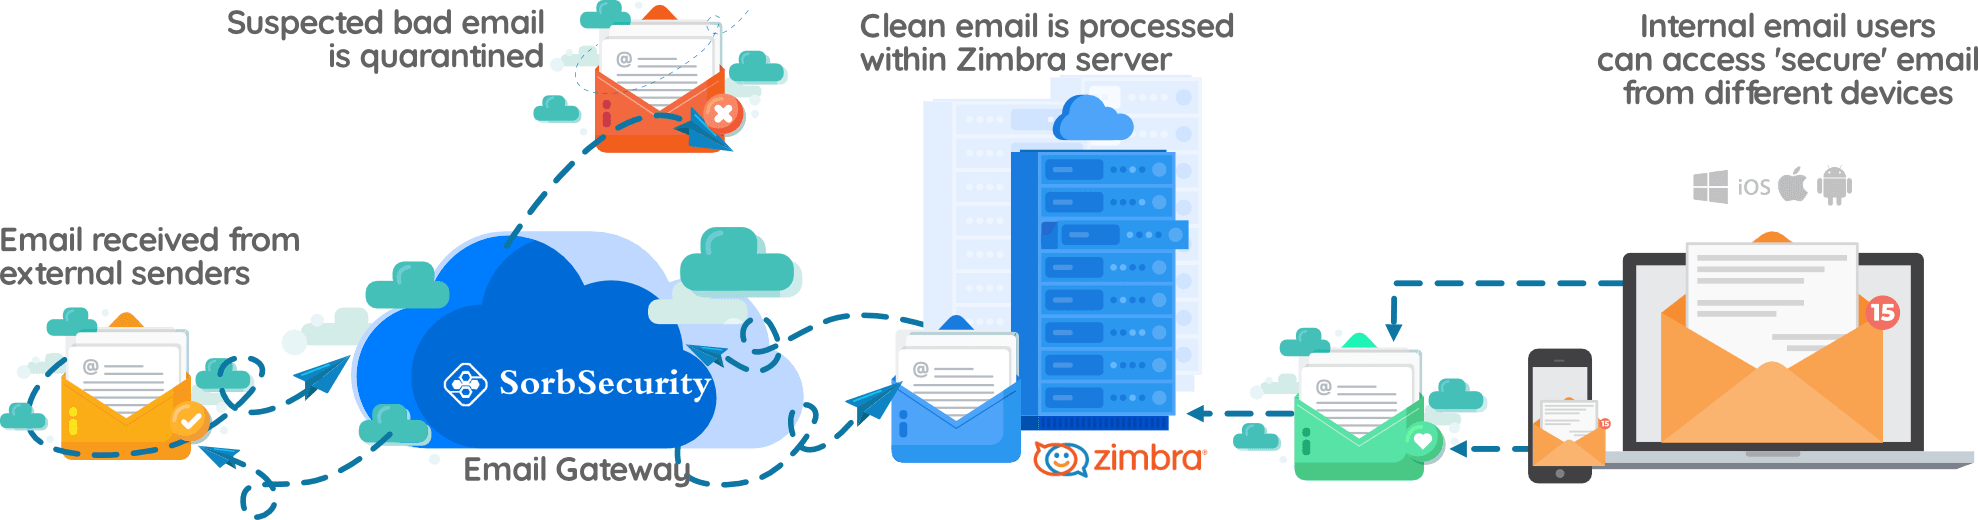 Upgrade Zimbra Account Email Scam - Removal and recovery steps